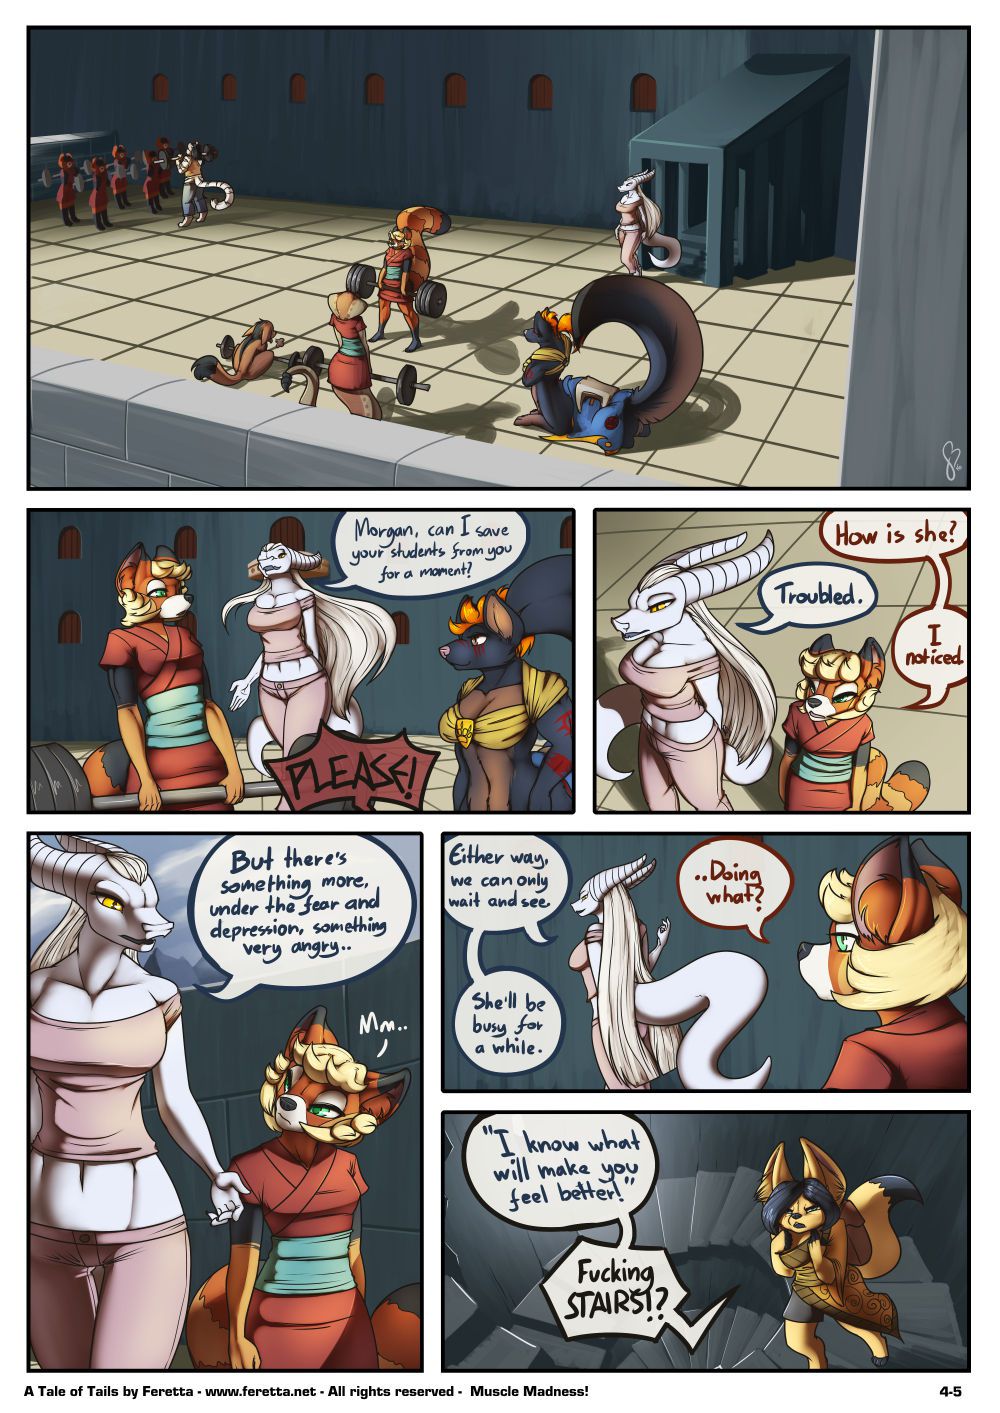 [Feretta] Farellian Legends: A Tale of Tails (w/Extras) [Ongoing] 155